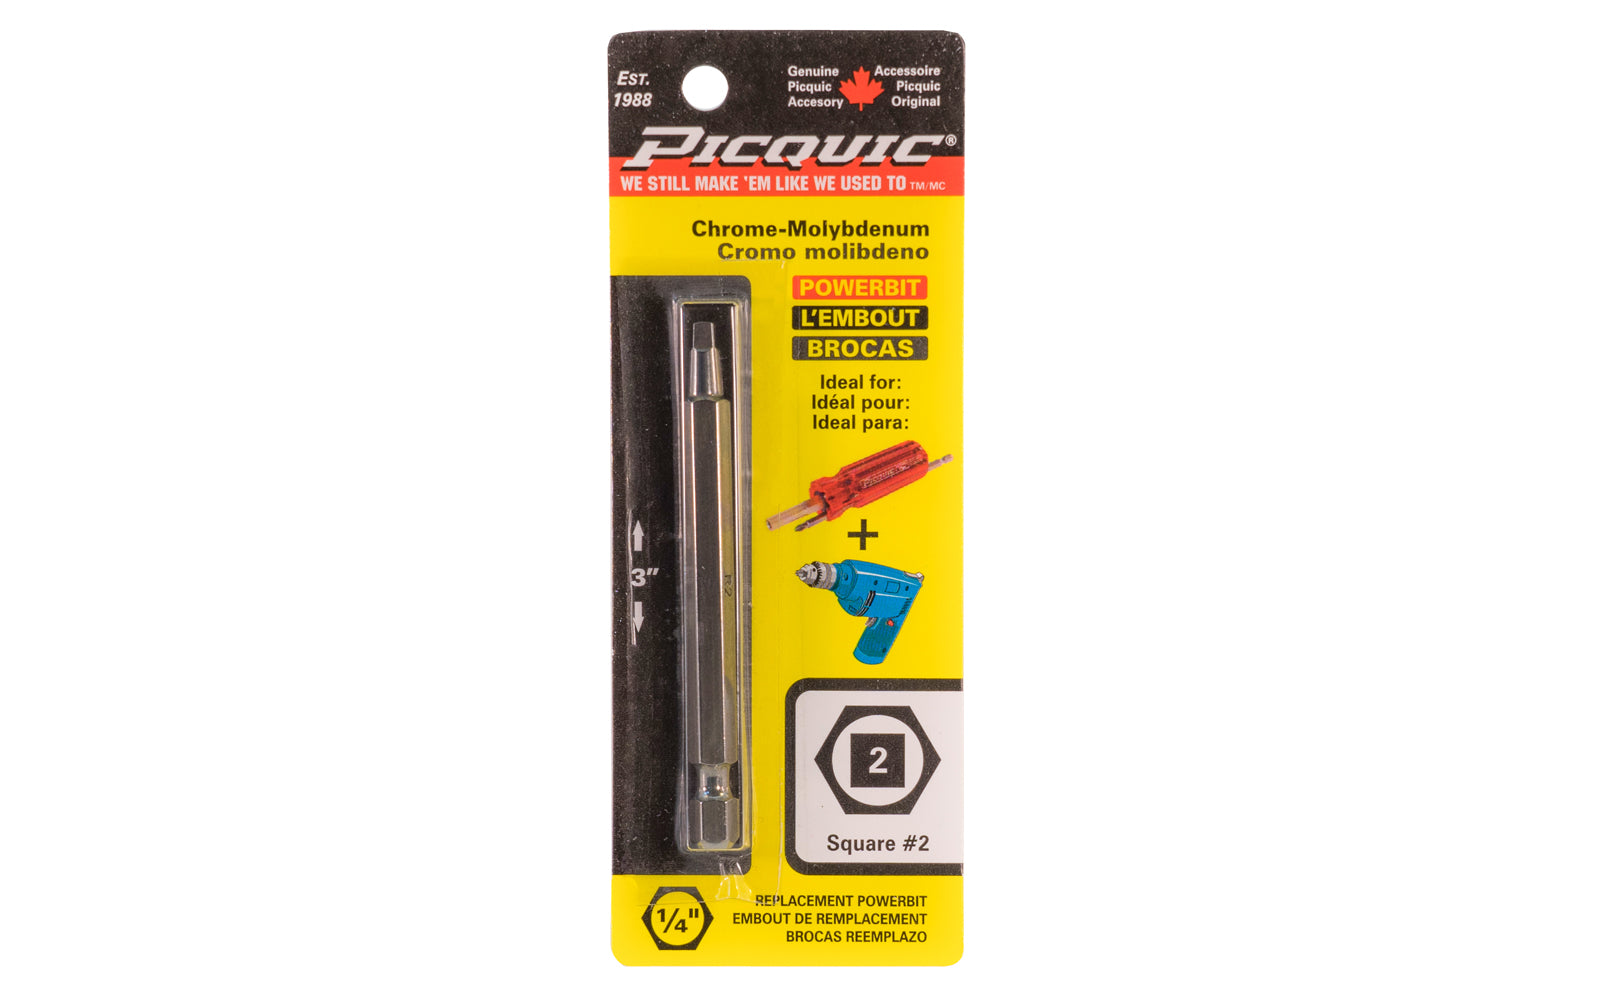 Picquic 3" length powerbit - #2 Robertson Square Drive Bit. 1/4" hex shank power bits ideal for use in drills & impact drivers. Model 88012.